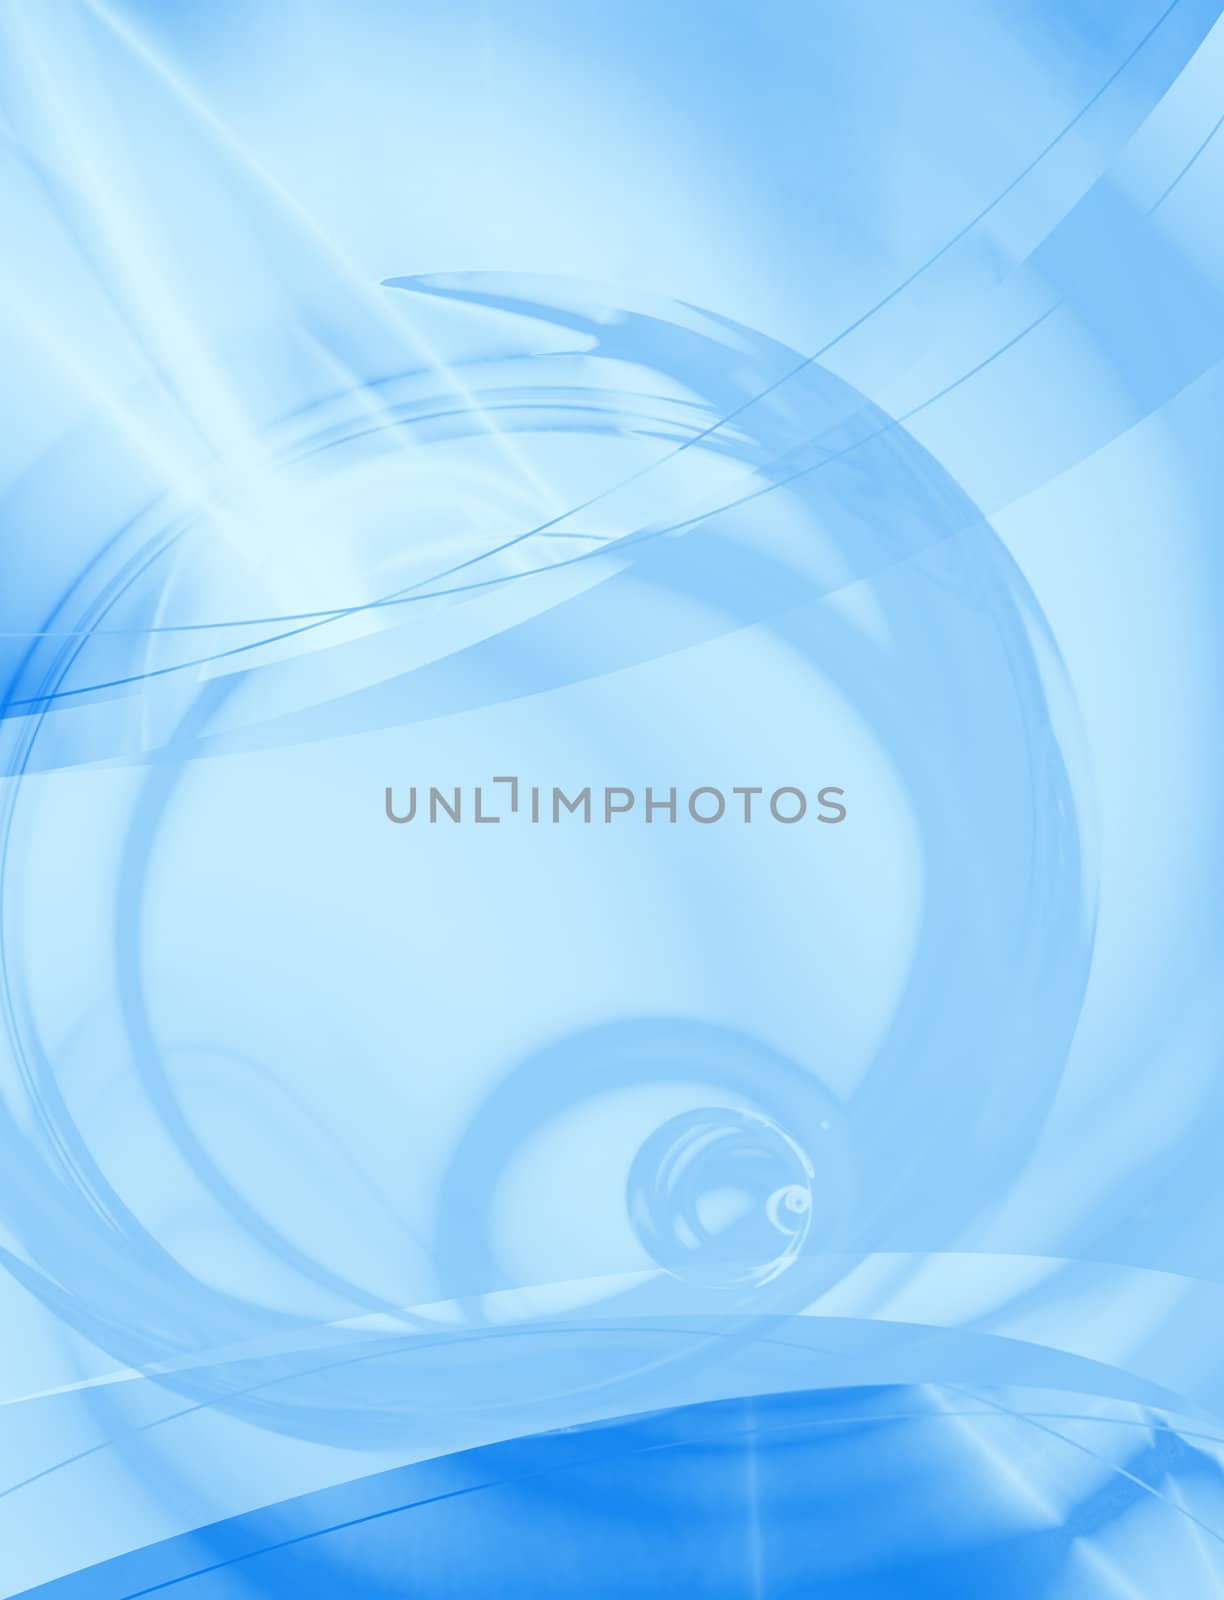 A blue abstract layout you can use as a template for any design piece.
